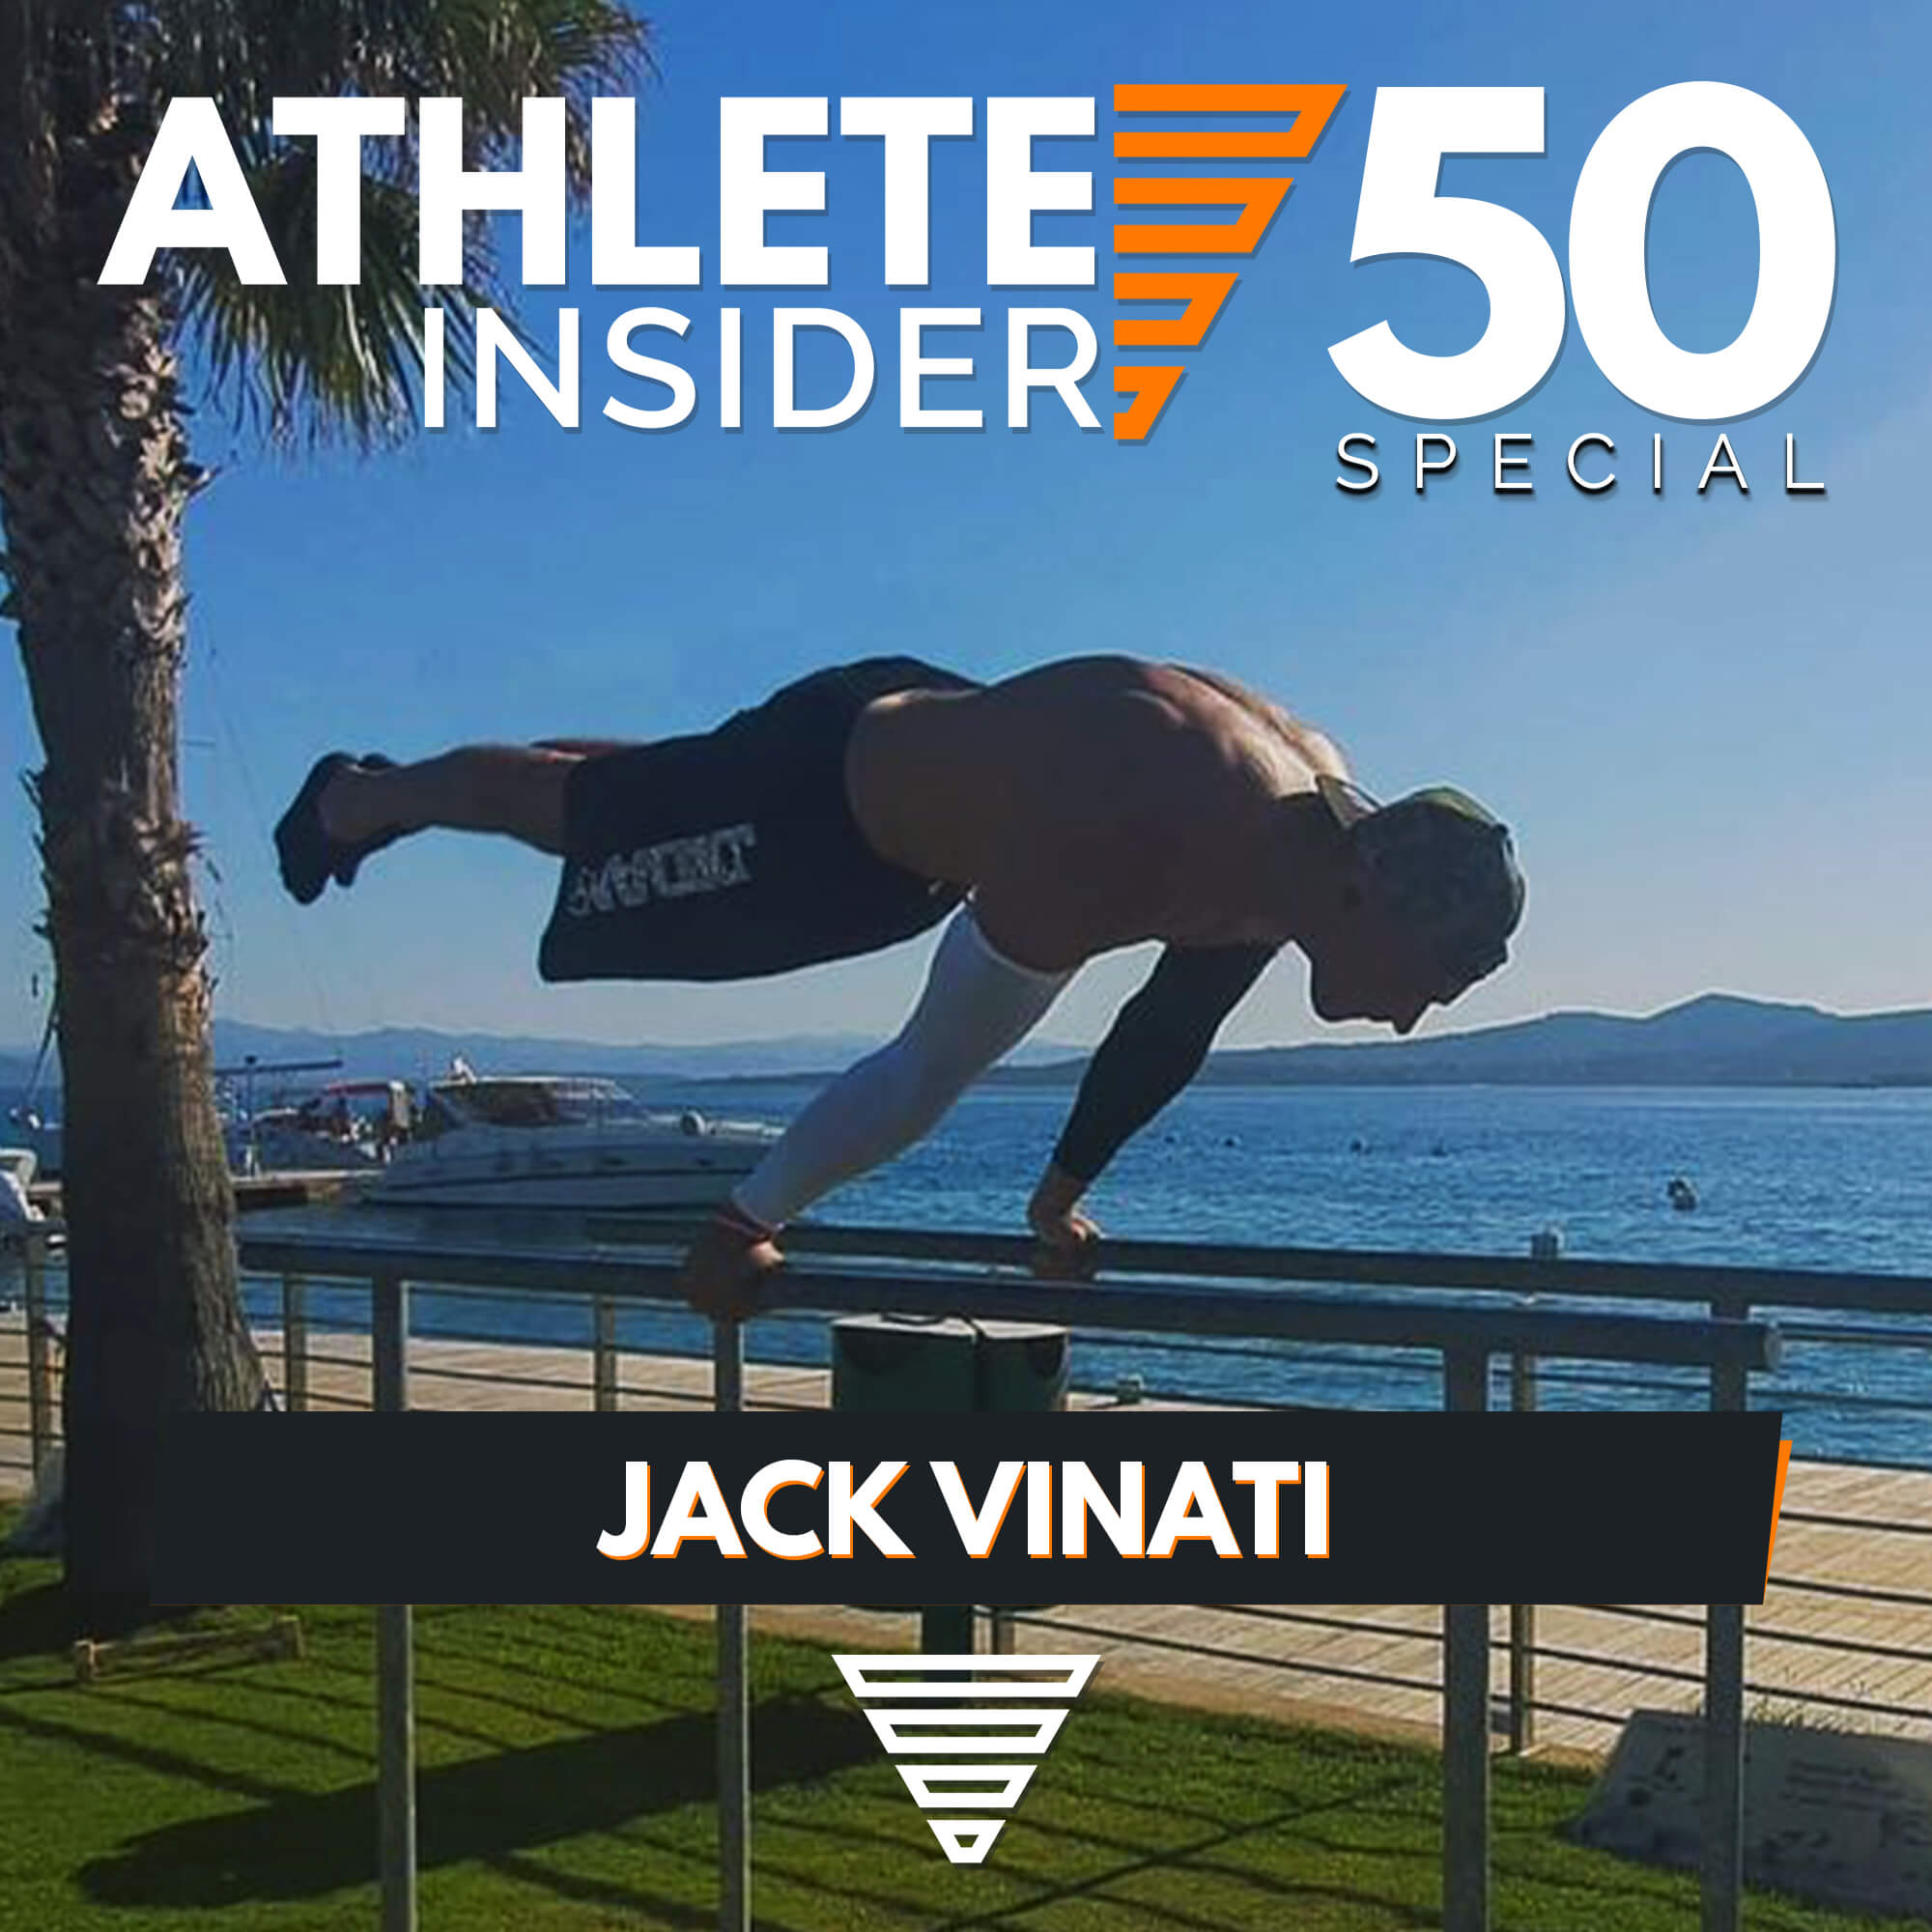 JACK VINATI | Full Planche with 202cm & 103kg | Interview | The Athlete Insider Podcast #50